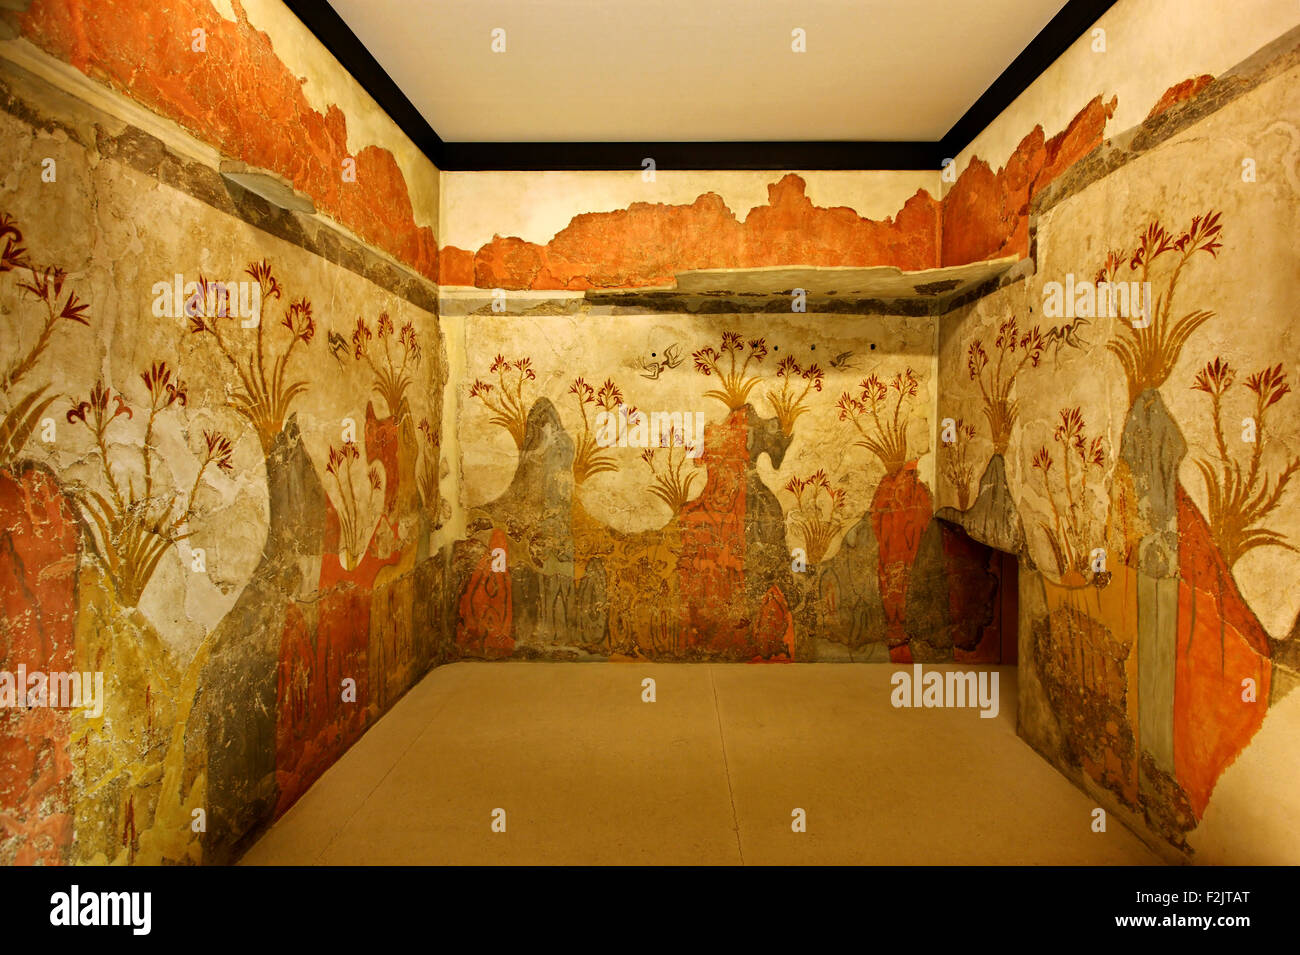 The 'Spring' fresco from the archaeological site of Akrotiri, (Santorini) in the National Archaeological Museum of Athens. Stock Photo